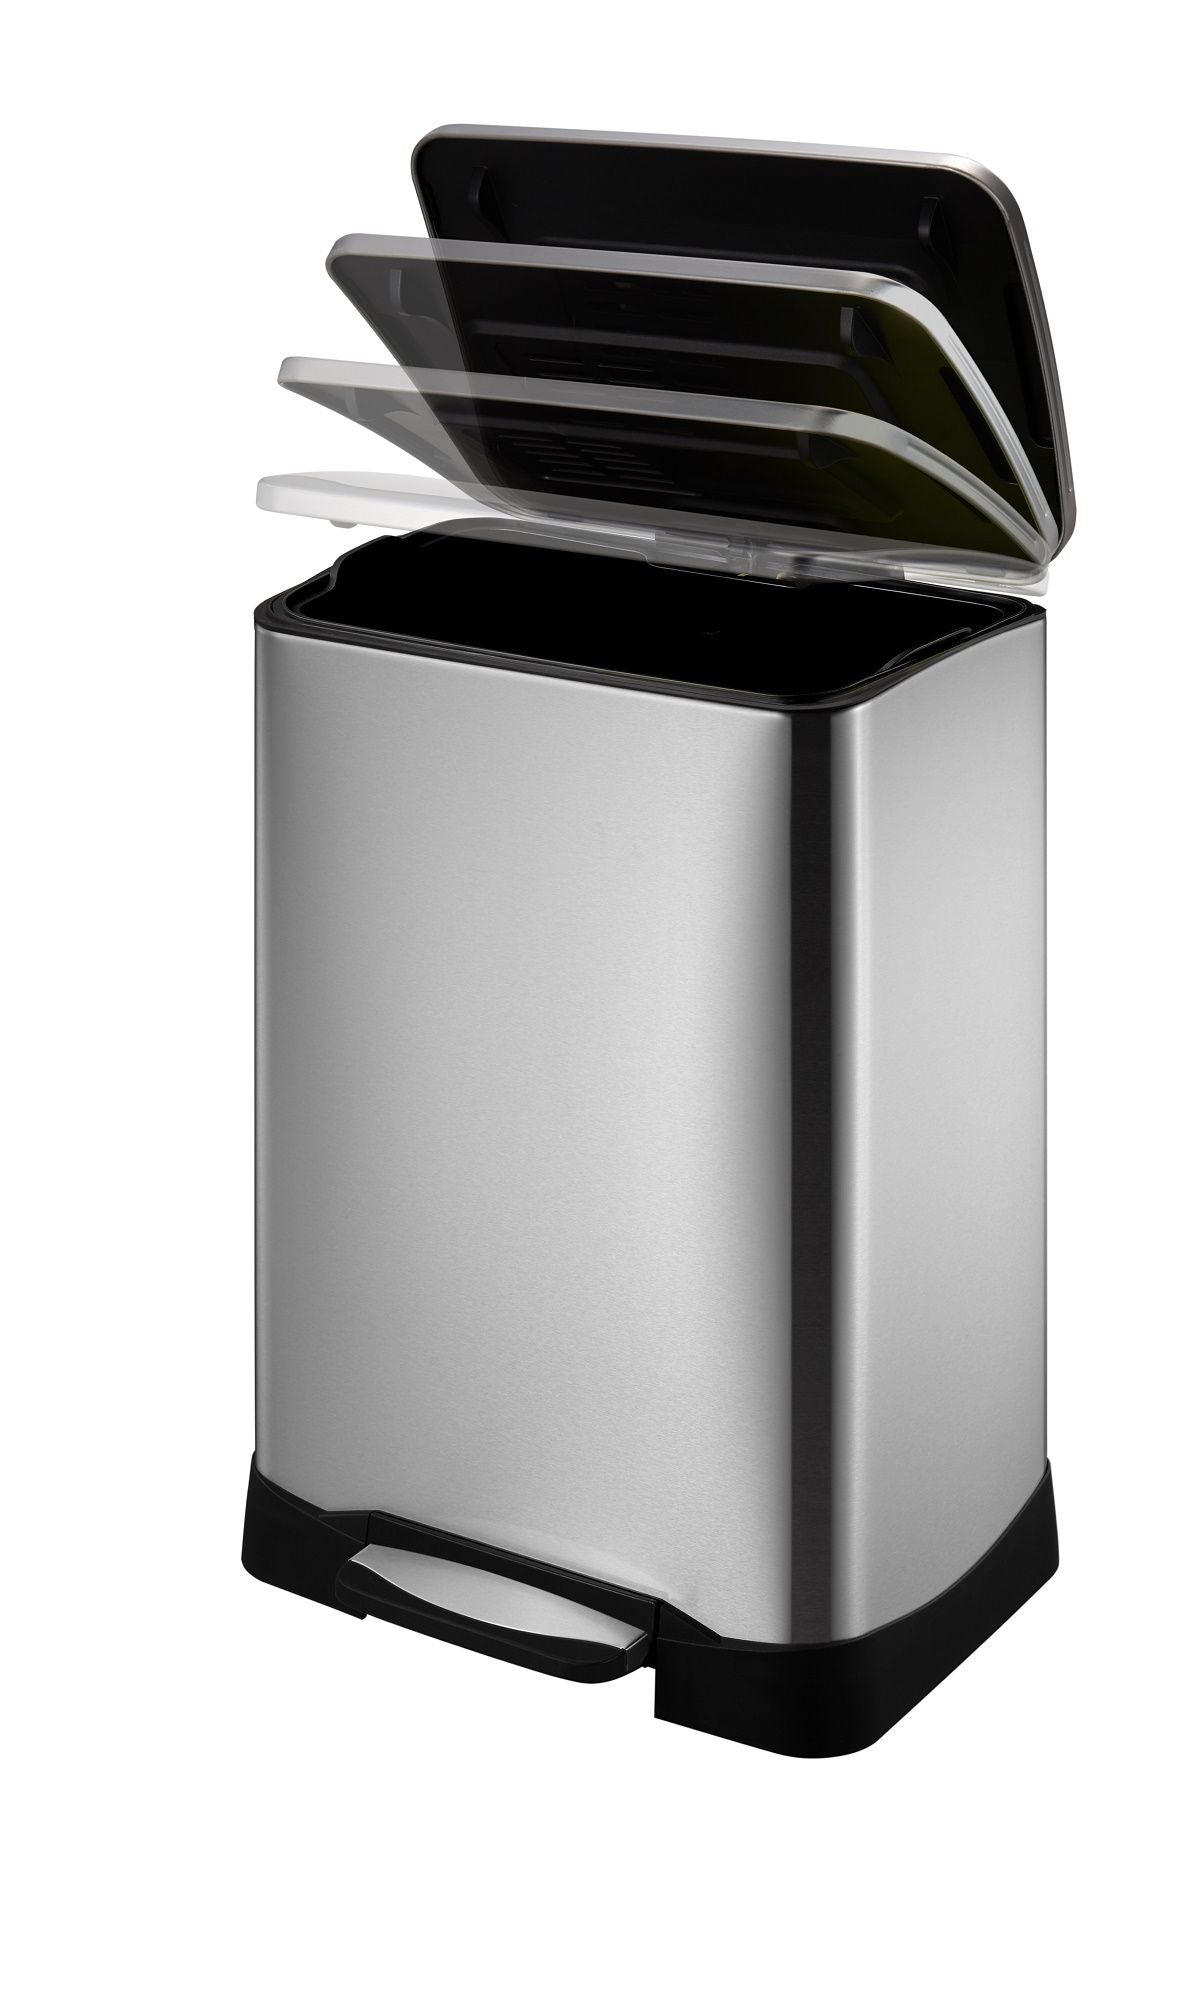 Neocube 50 Liter Stainless Steel Trash Can